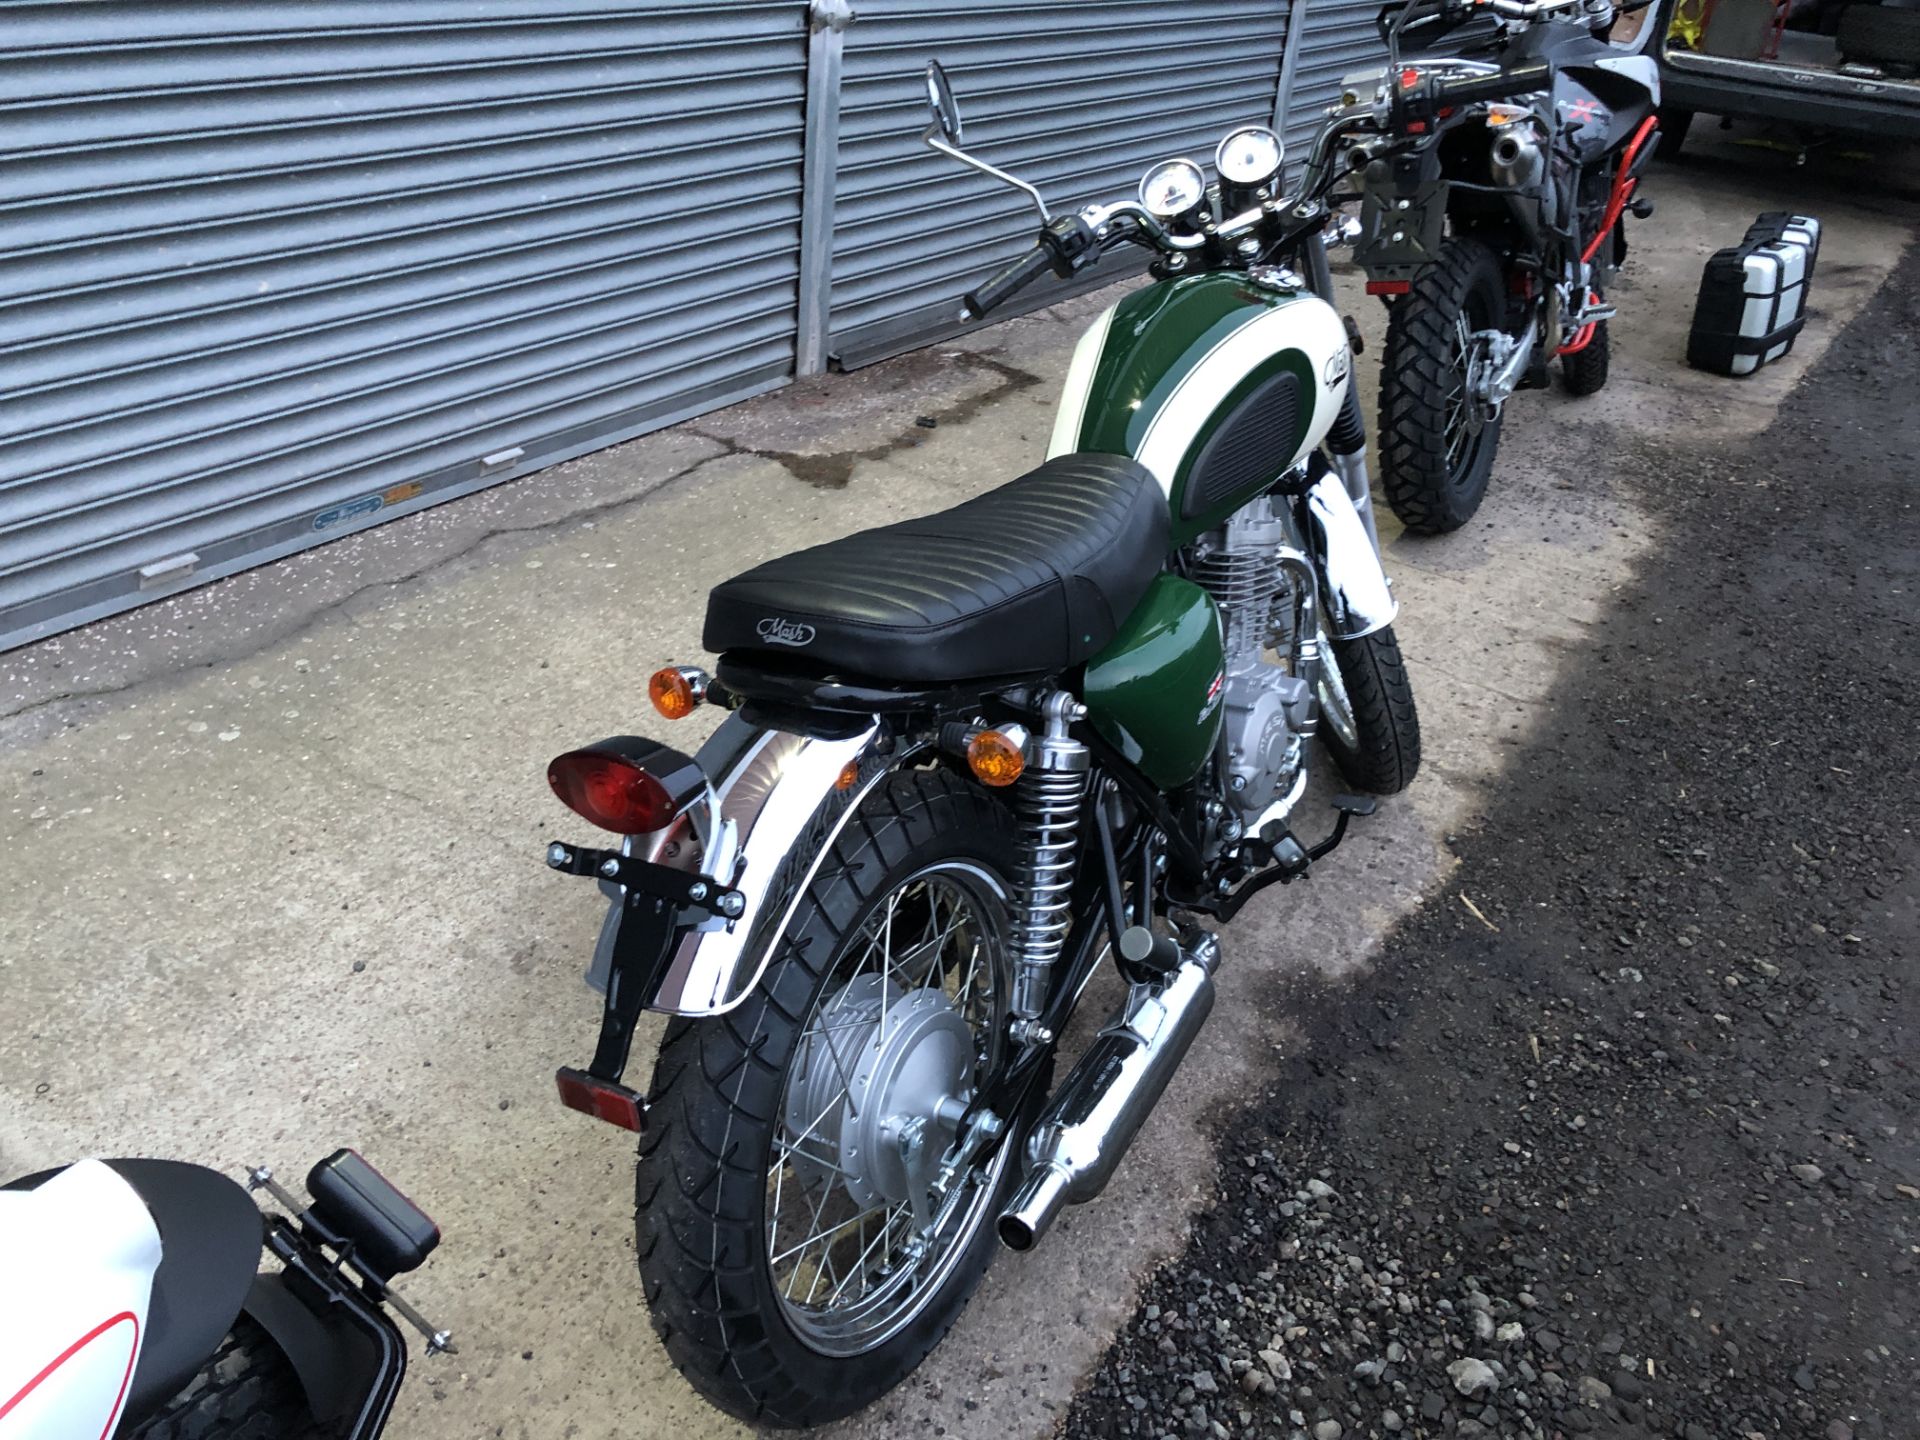 Mash Roadstar 400 As New Condition was collected from Main Dealer after the Mash Importer in the - Image 5 of 17